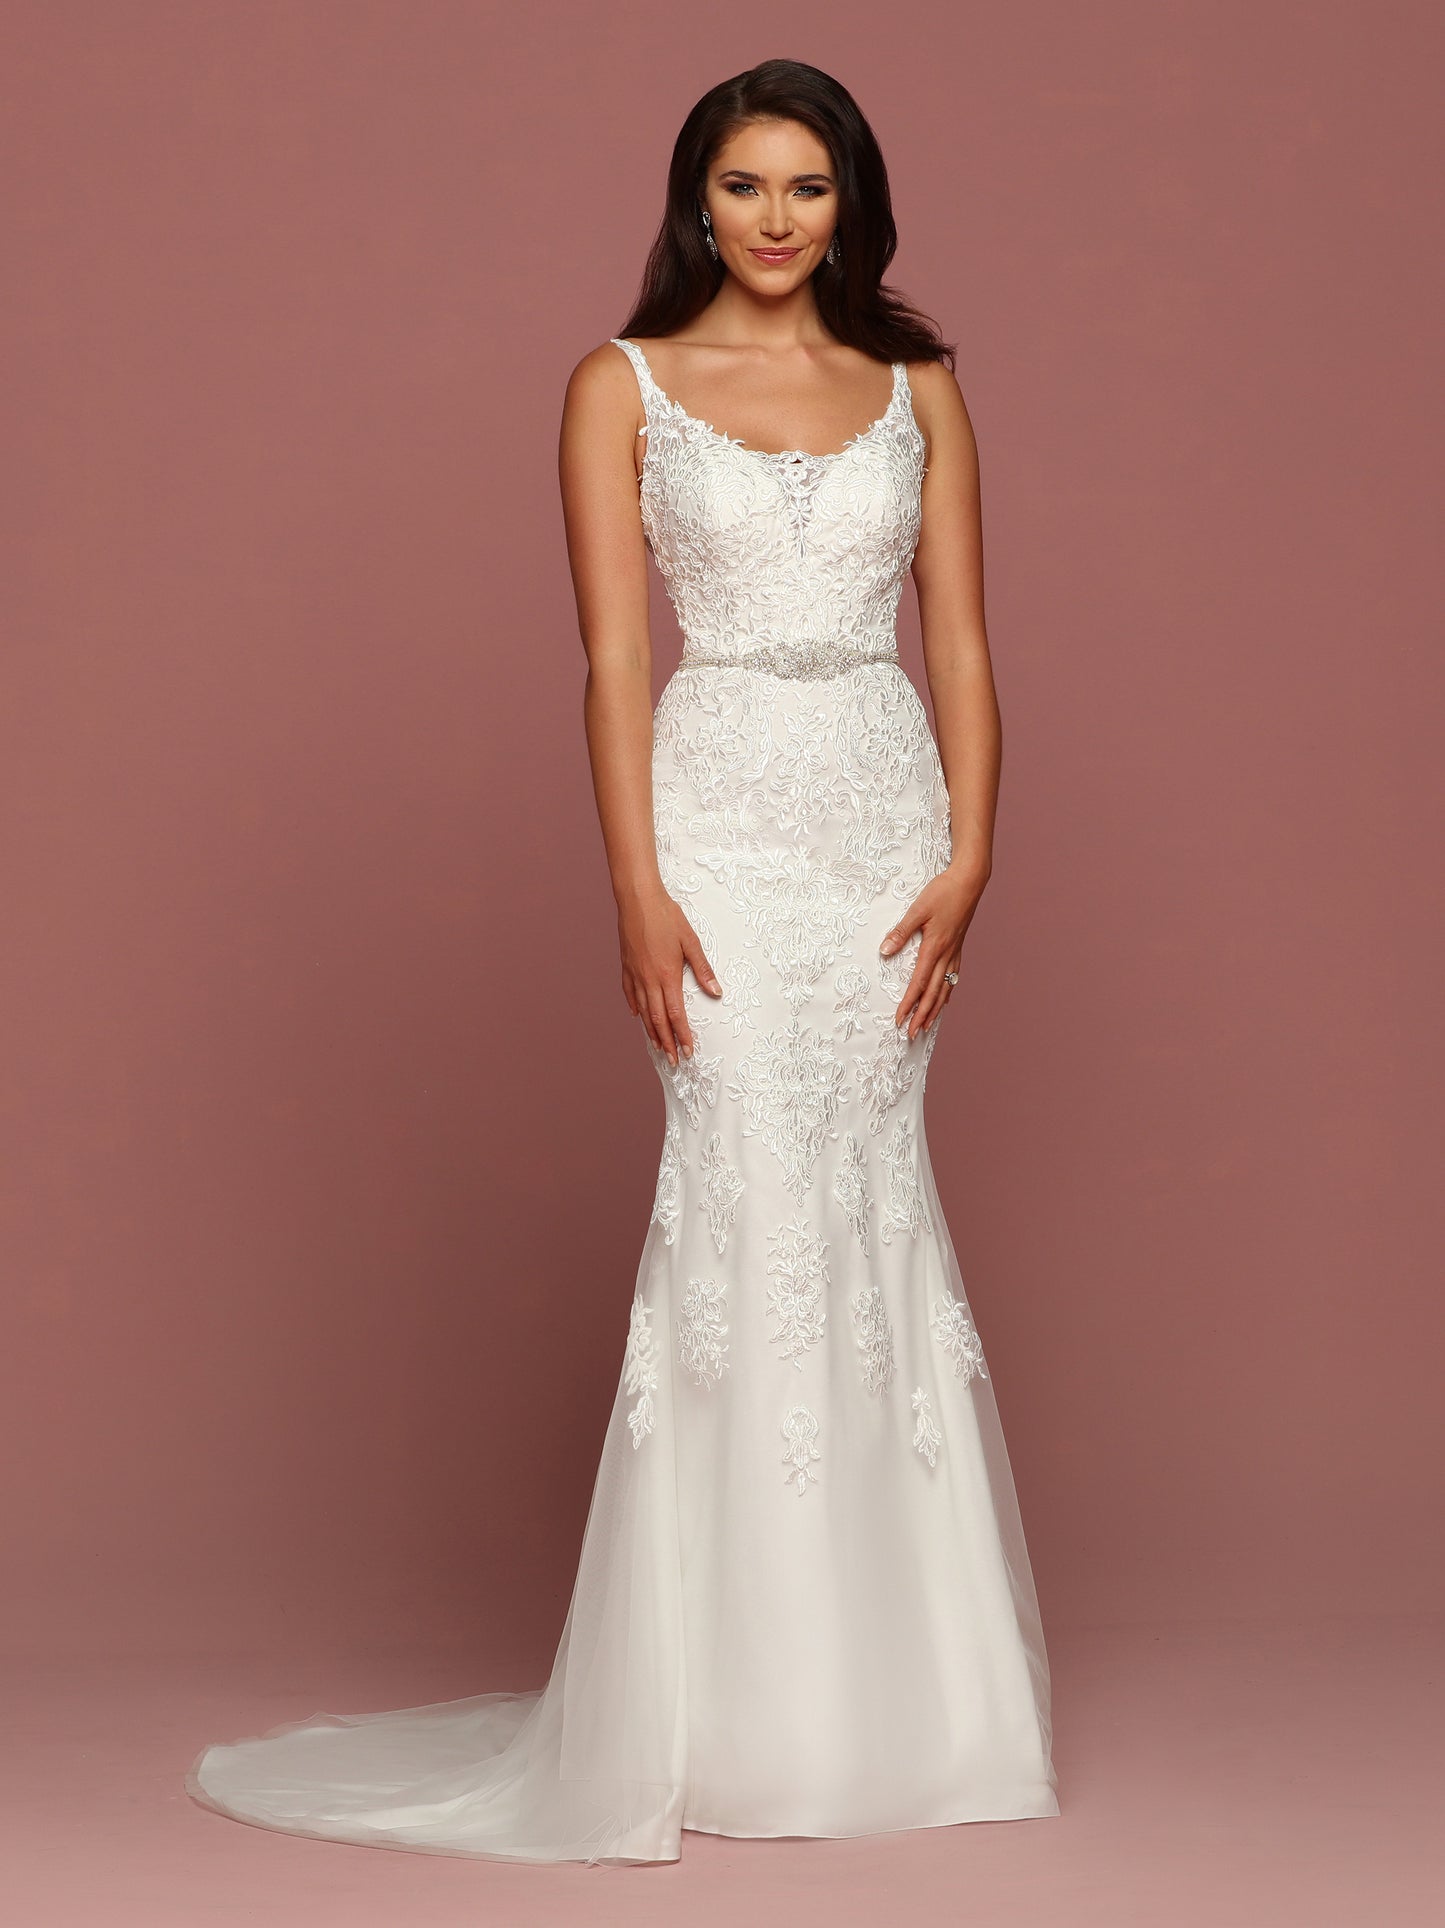 Davinci Bridal 50493 is a ling fitted mermaid silhouette wedding dress. Featuring a sheer lace illusion plunging neckline. Lace embellished straps. Crystal Embellished Bridal waist belt. Lace disperses the further down it cascades.  Available for 1-2 Week Delivery!!!  Available Sizes: 2,4,6,8,10,12,14,16,18,20  Available Colors: Ivory